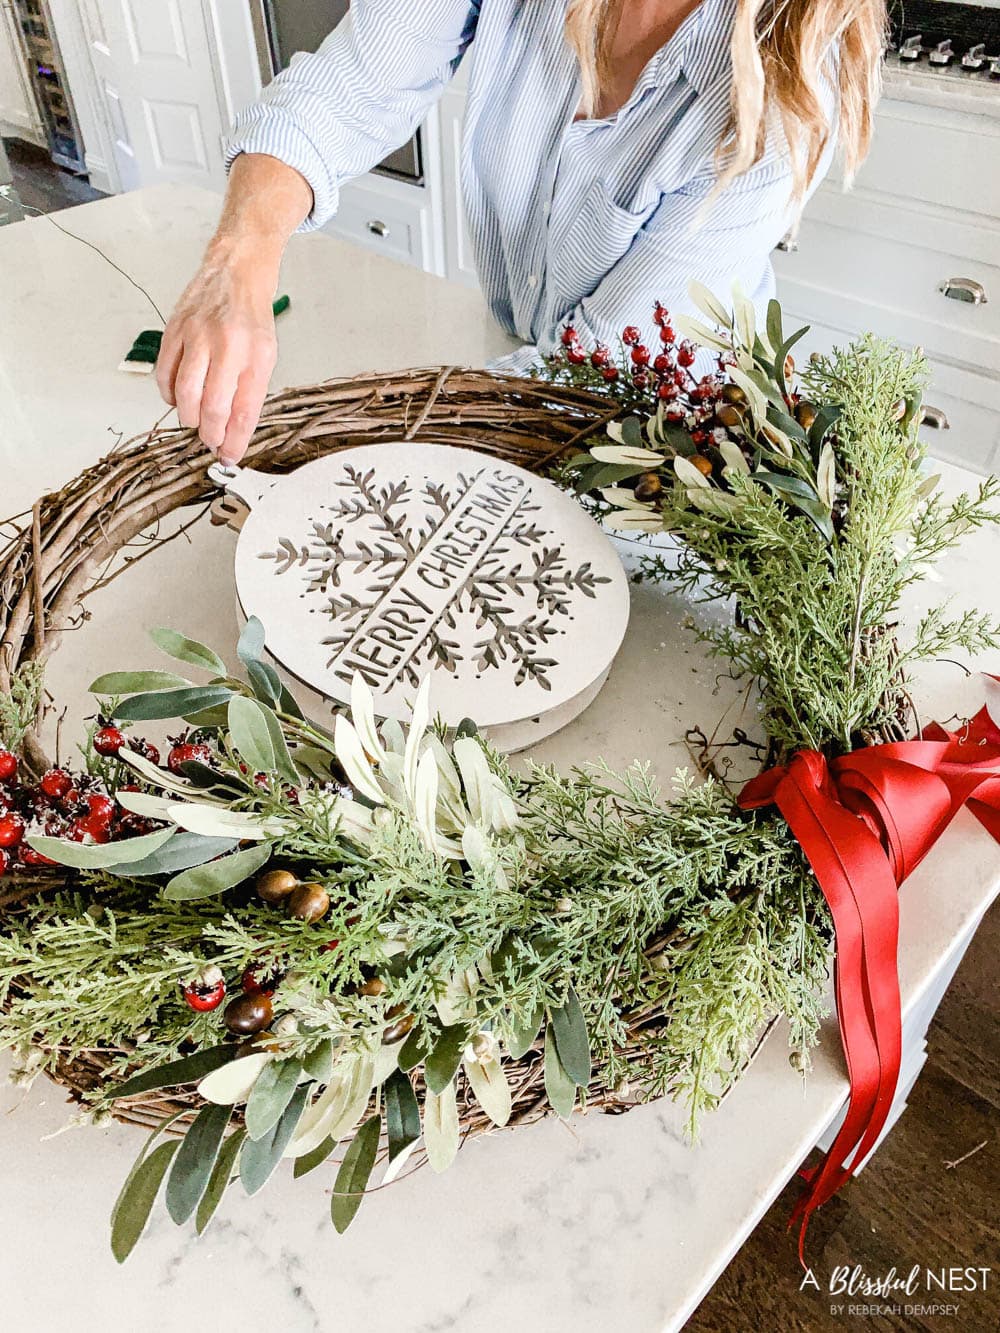 How to Make a Beautiful Christmas Grapevine Wreath - A Blissful Nest